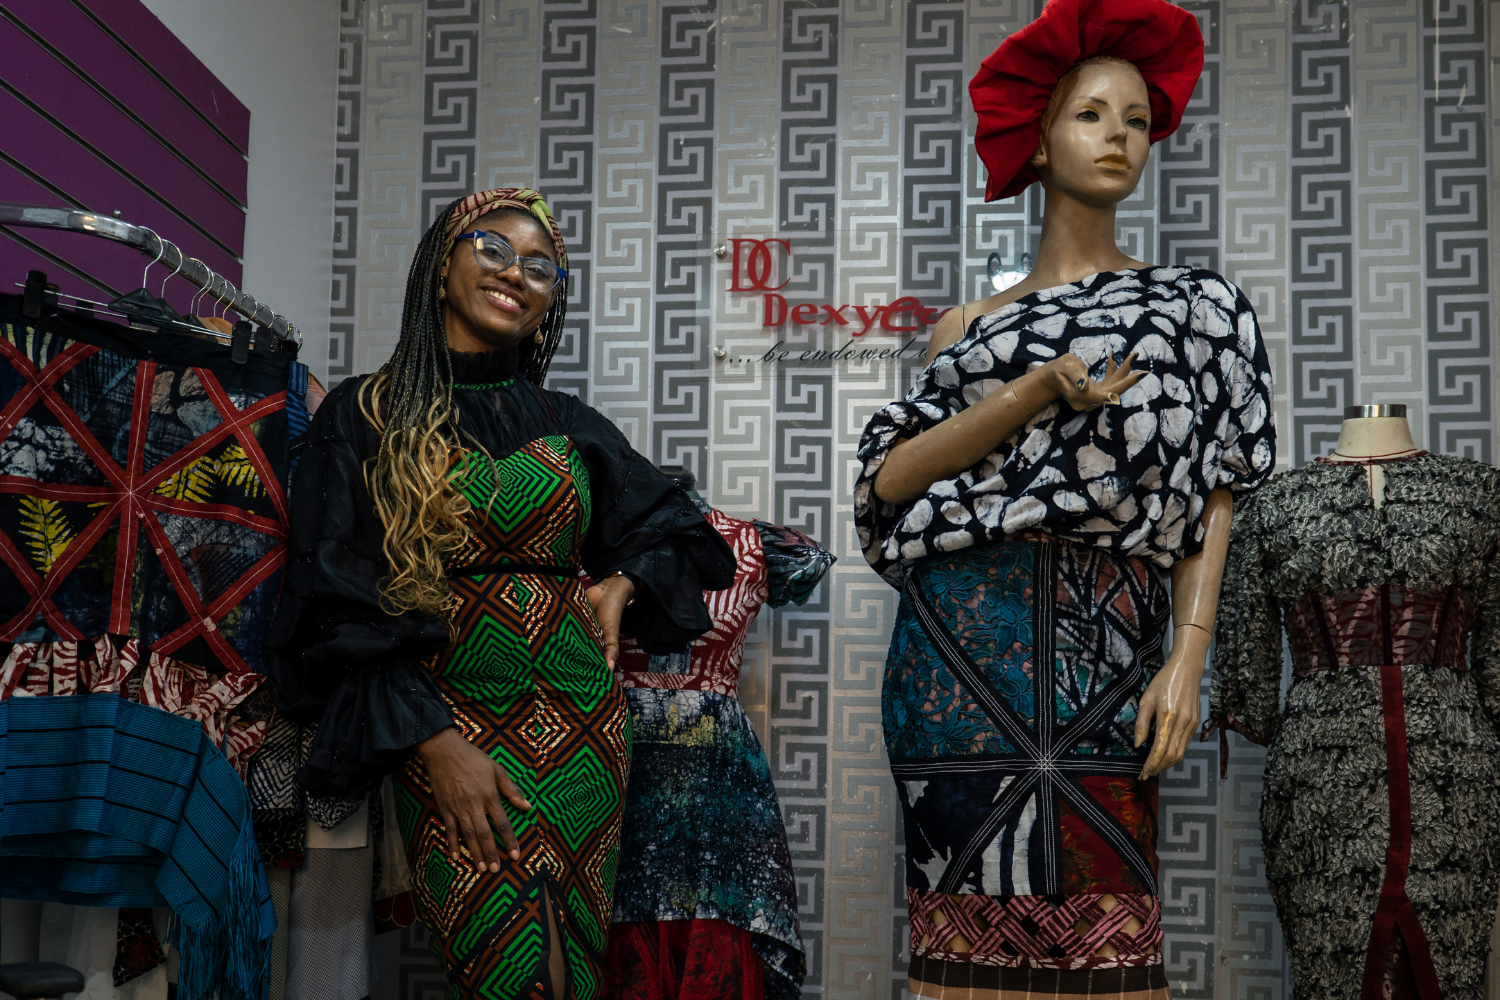 Adaeze Onu poses with dresses at her design company, Dexycreation in Nigeria.